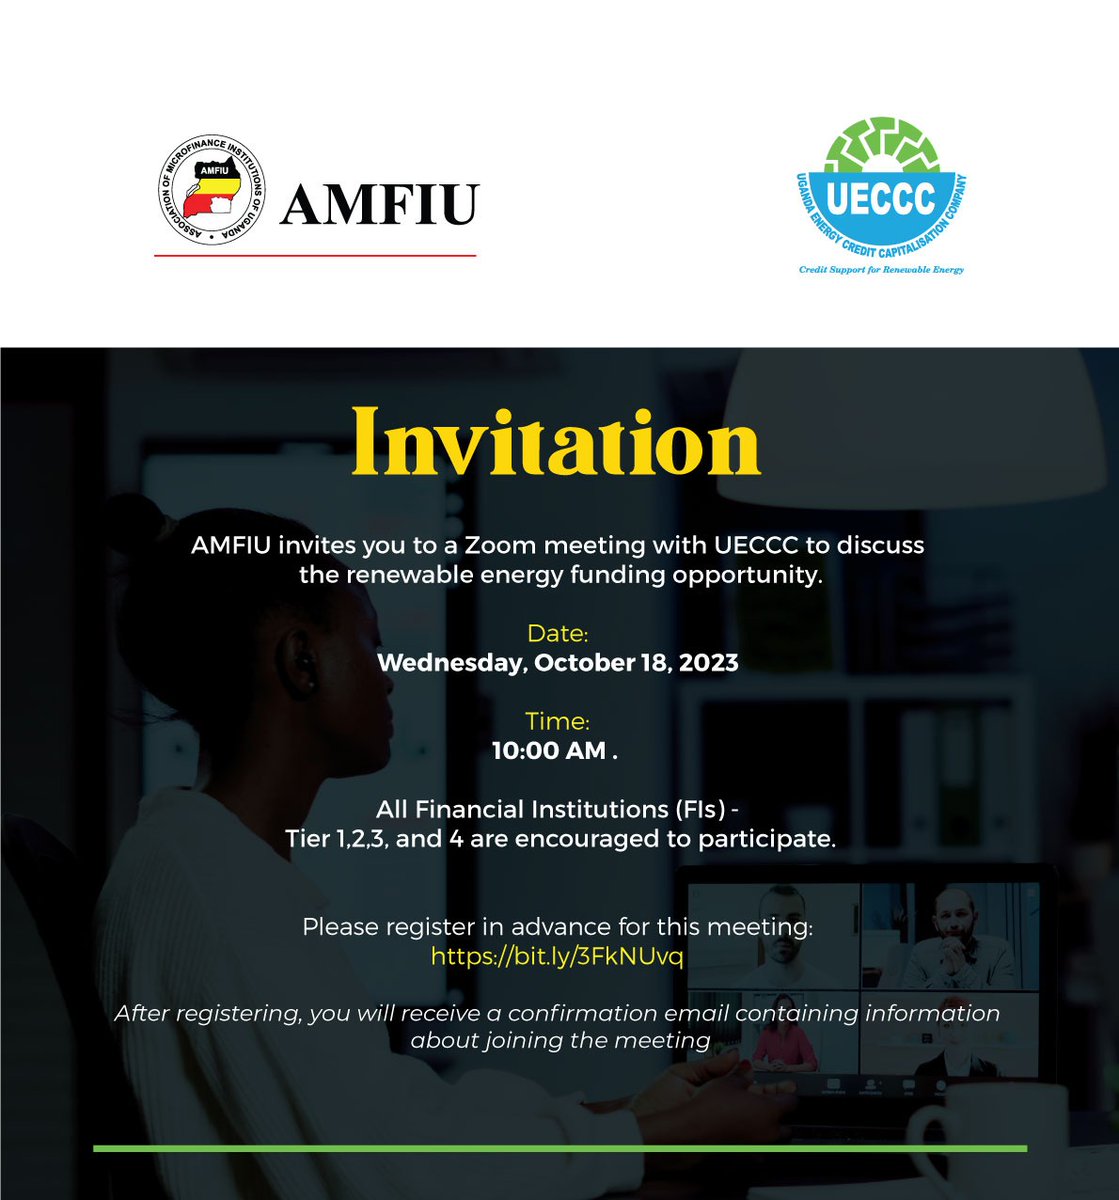 Financial Institutions are invited to attend this zoom meeting tomorrow, 18th October 2023 to discuss funding opportunities in the #RenewableEnergy sector. #EASP Use link below to register bit.ly/3FkNUvq